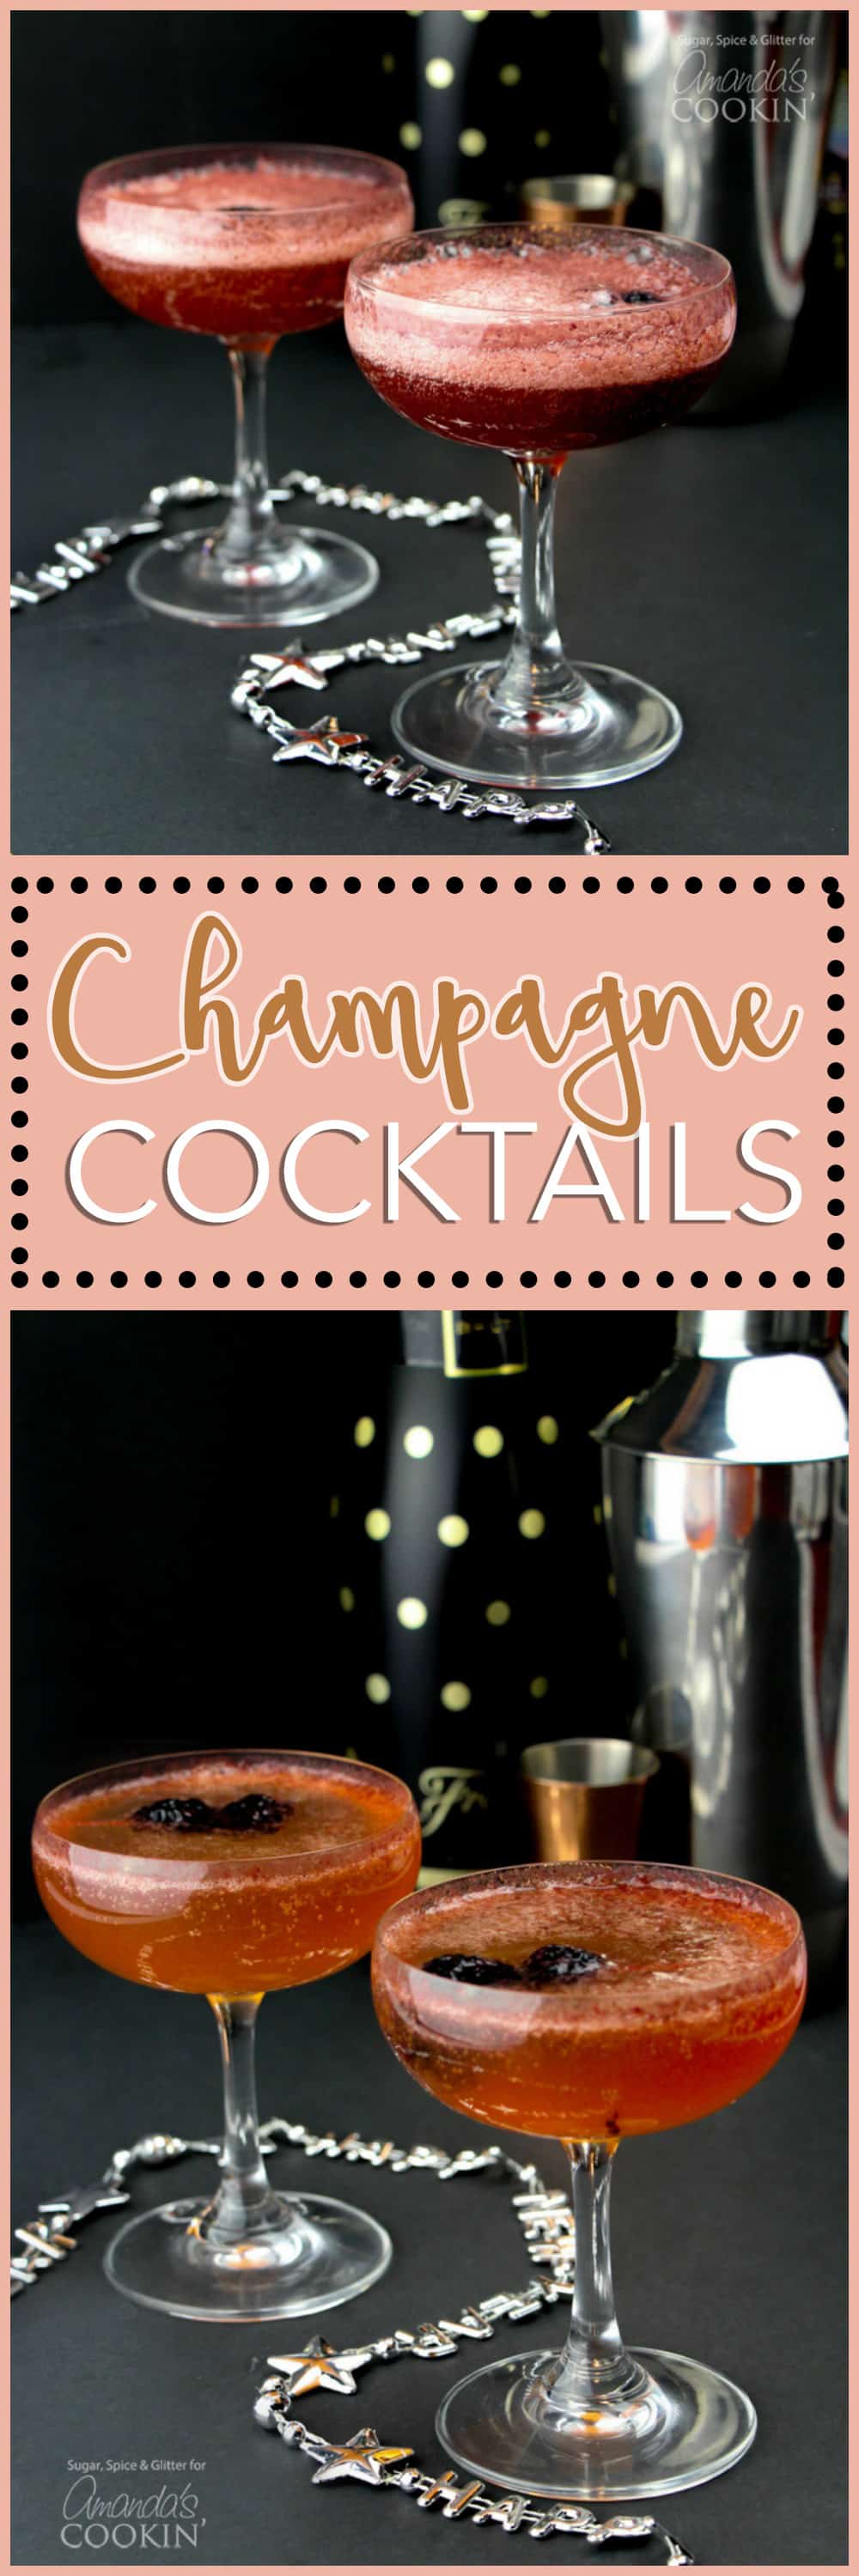 pinterest image for champagne cocktail